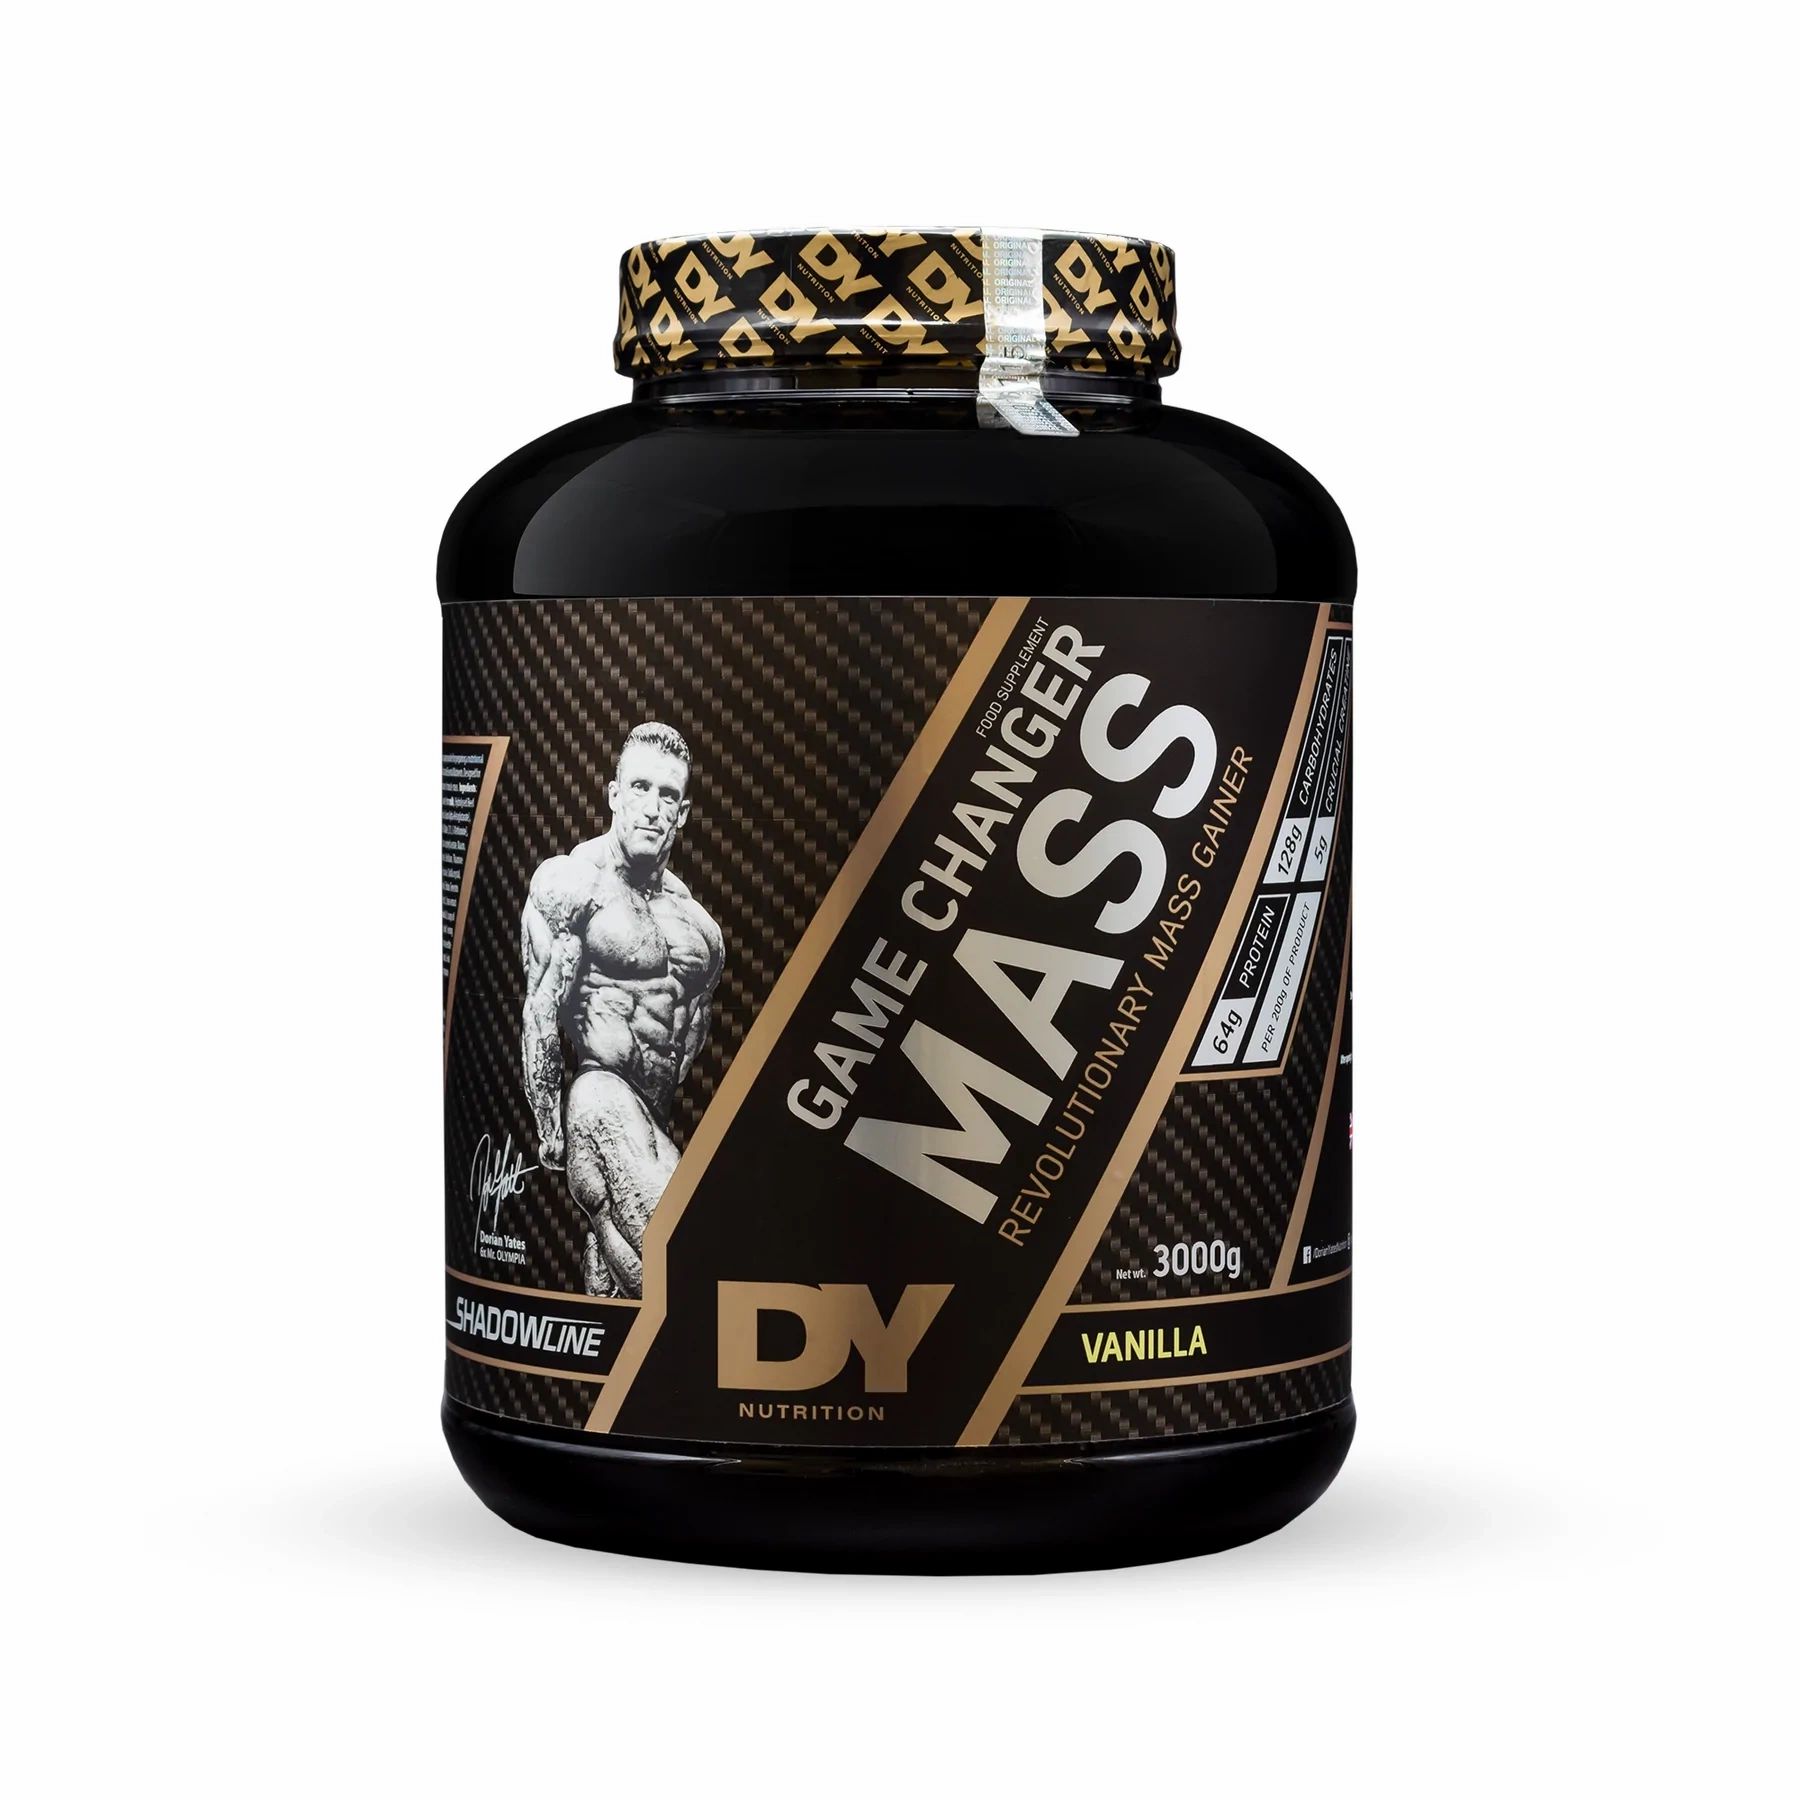 DY Nutrition Game Changer Mass